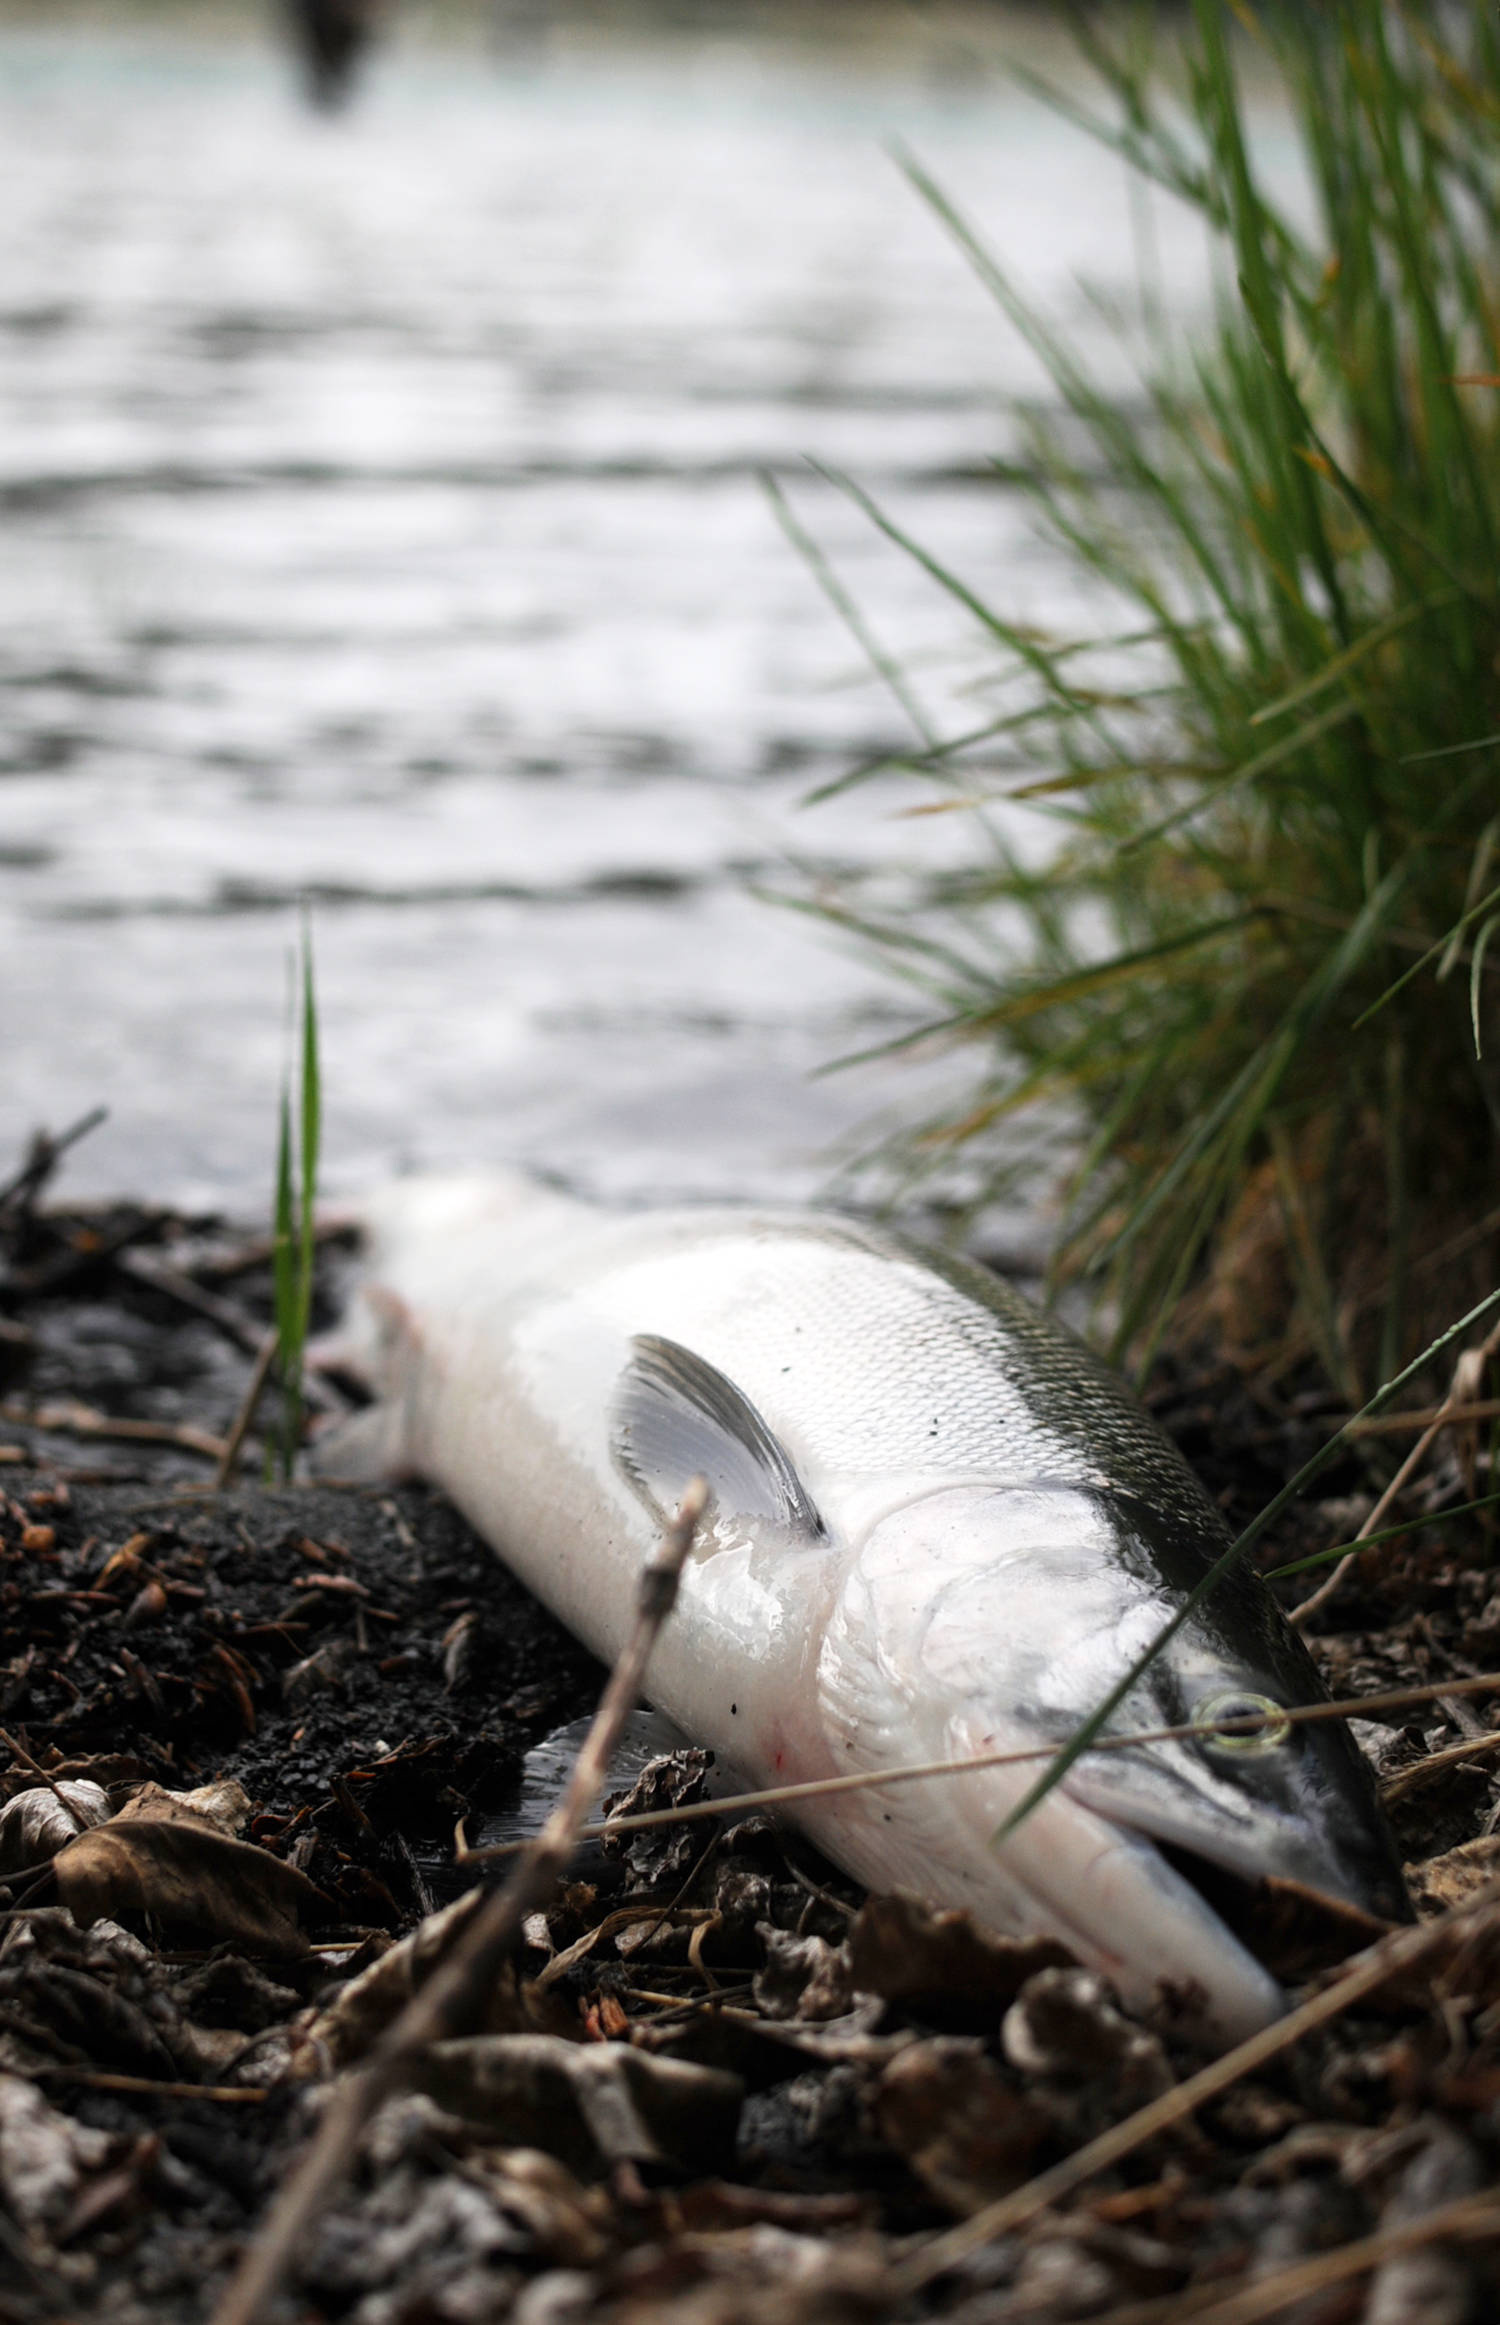 A sockeye salmon hooked by a lucky angler rests on the bank of the Kenai River downstream of the confluence with the Russian River on Sunday, June 11, 2017 near Cooper Landing. (Elizabeth Earl/Peninsula Clarion, file)